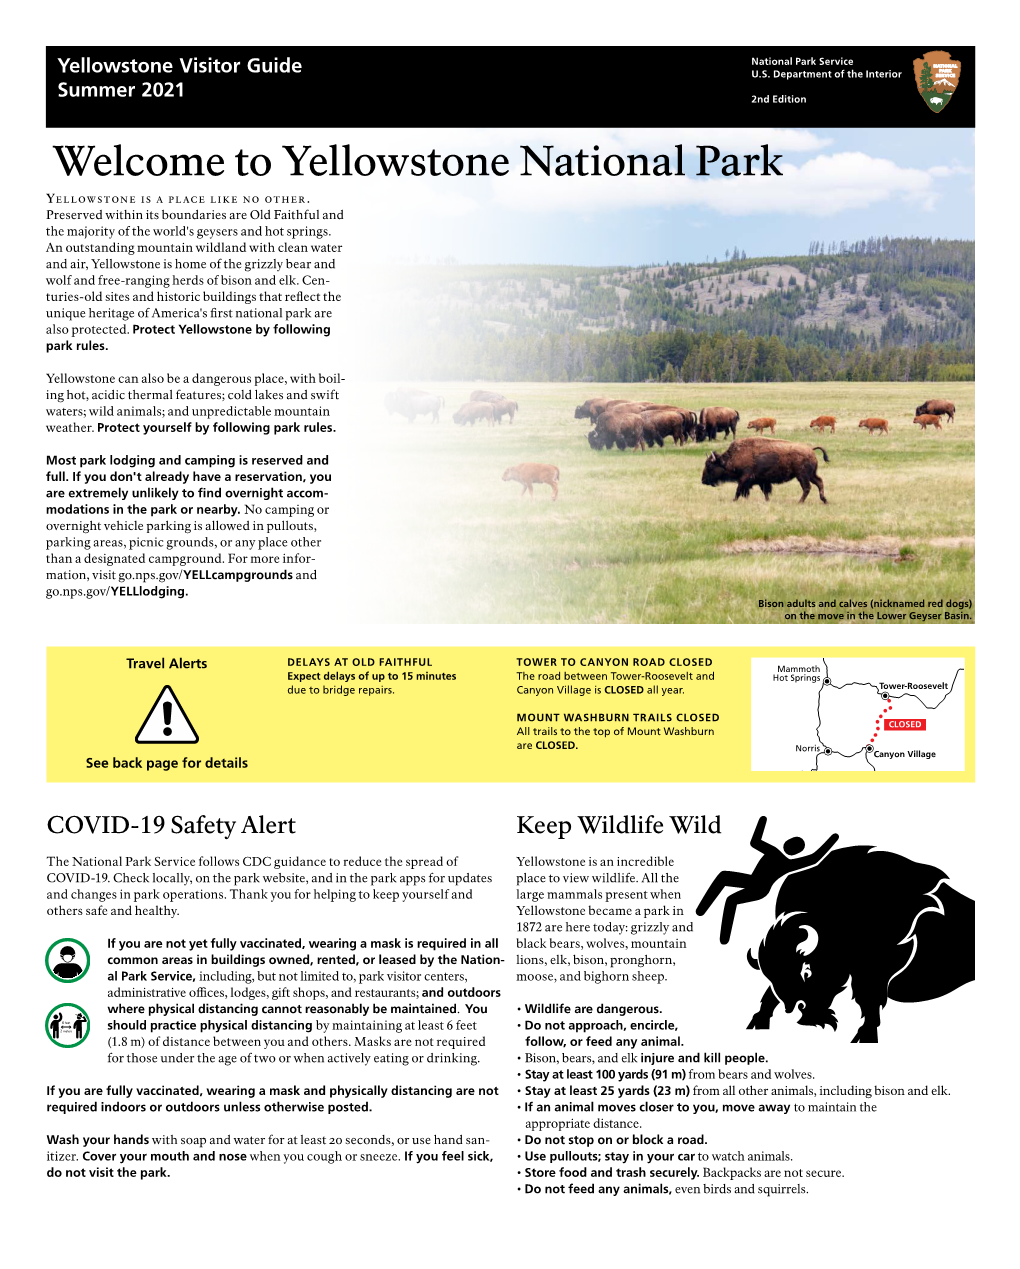 Yellowstone National Park Summer Visitor Guide, 2Nd Edition